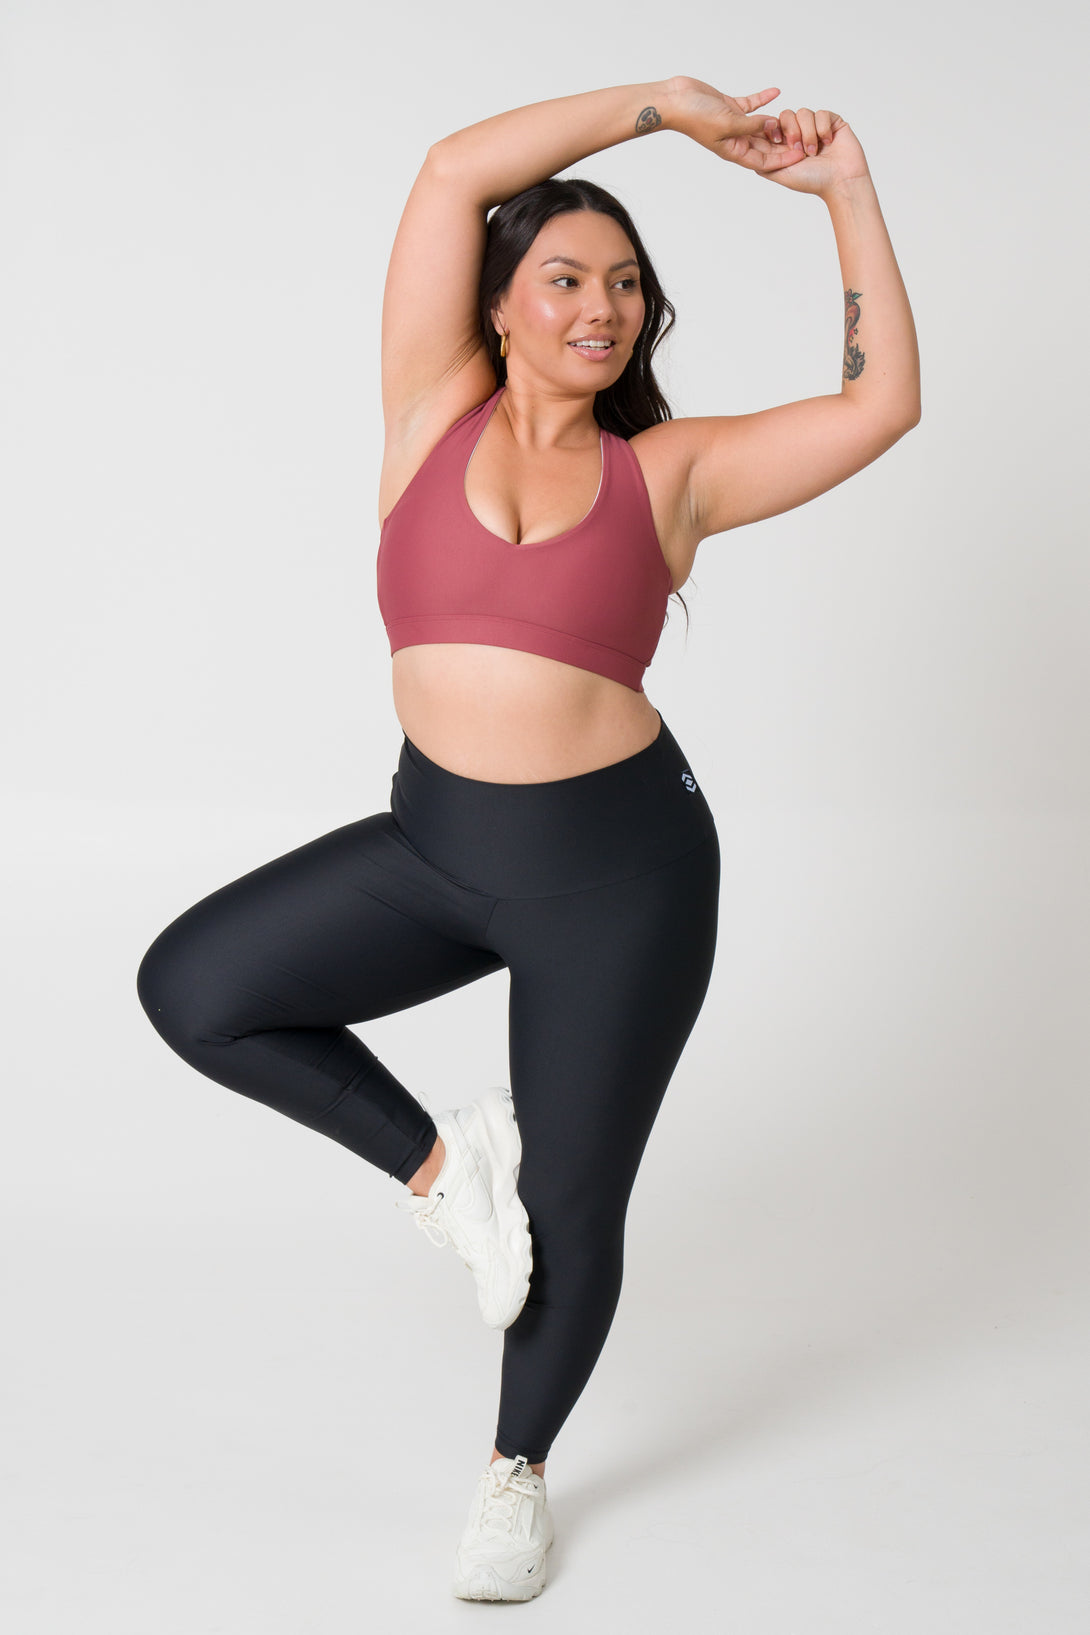 Blush deep V crop top, offering style and support for active women during workouts or everyday activities